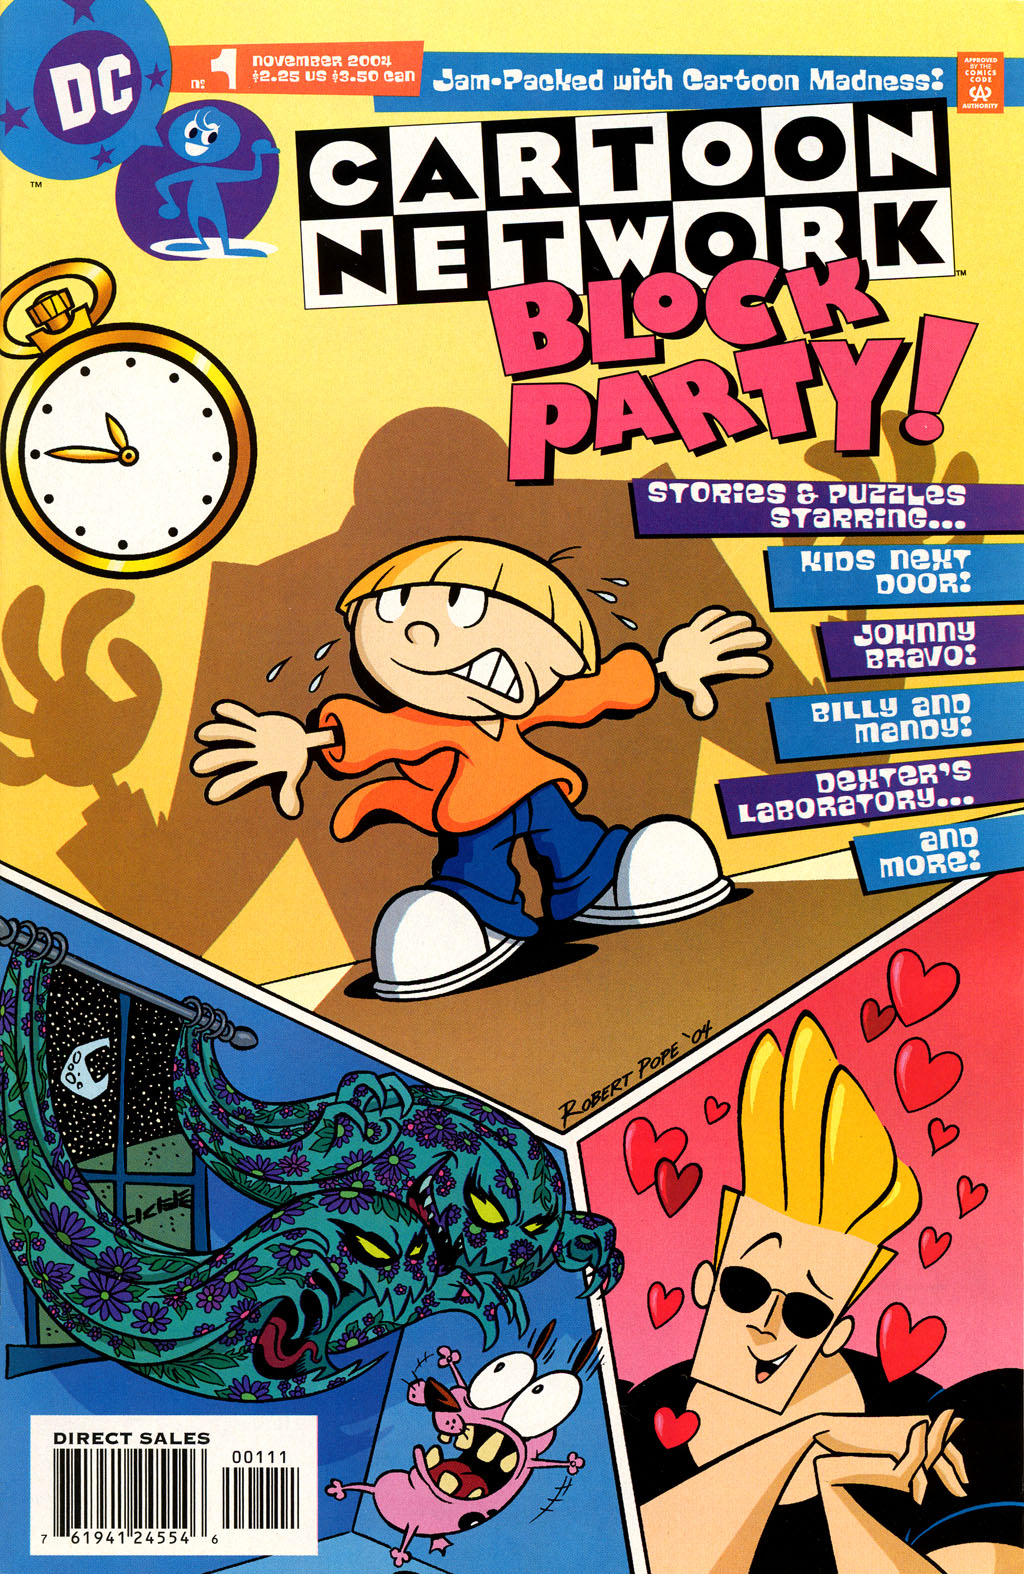 https://static.wikia.nocookie.net/johnnybravo/images/9/92/CN_Block_Party_1_Cover.jpg/revision/latest?cb=20210308014250